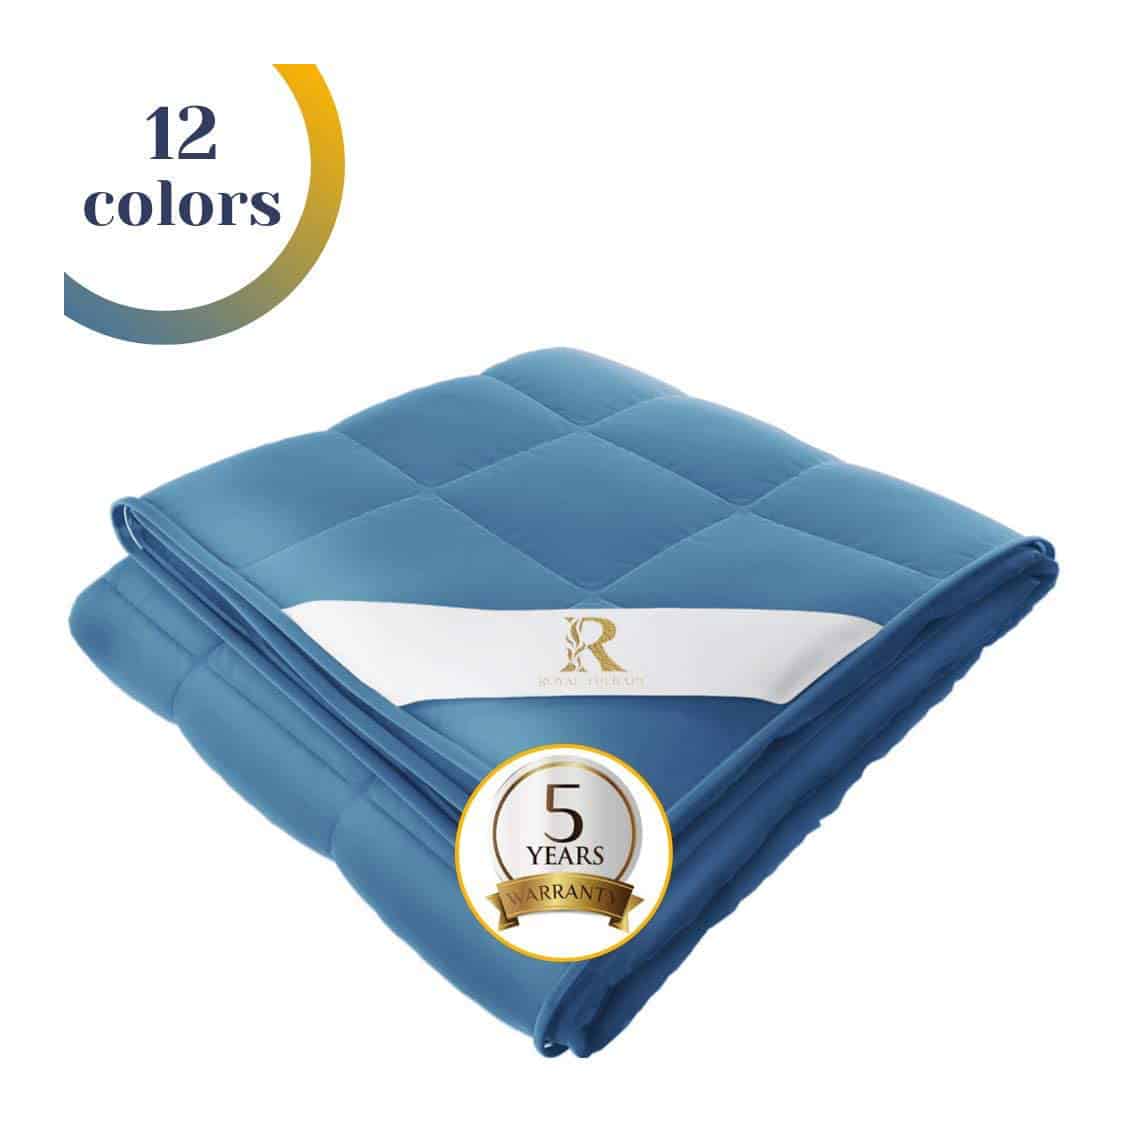 Top 10 Best Adults Weighted Blankets in 2022 Reviews - GoOnProducts